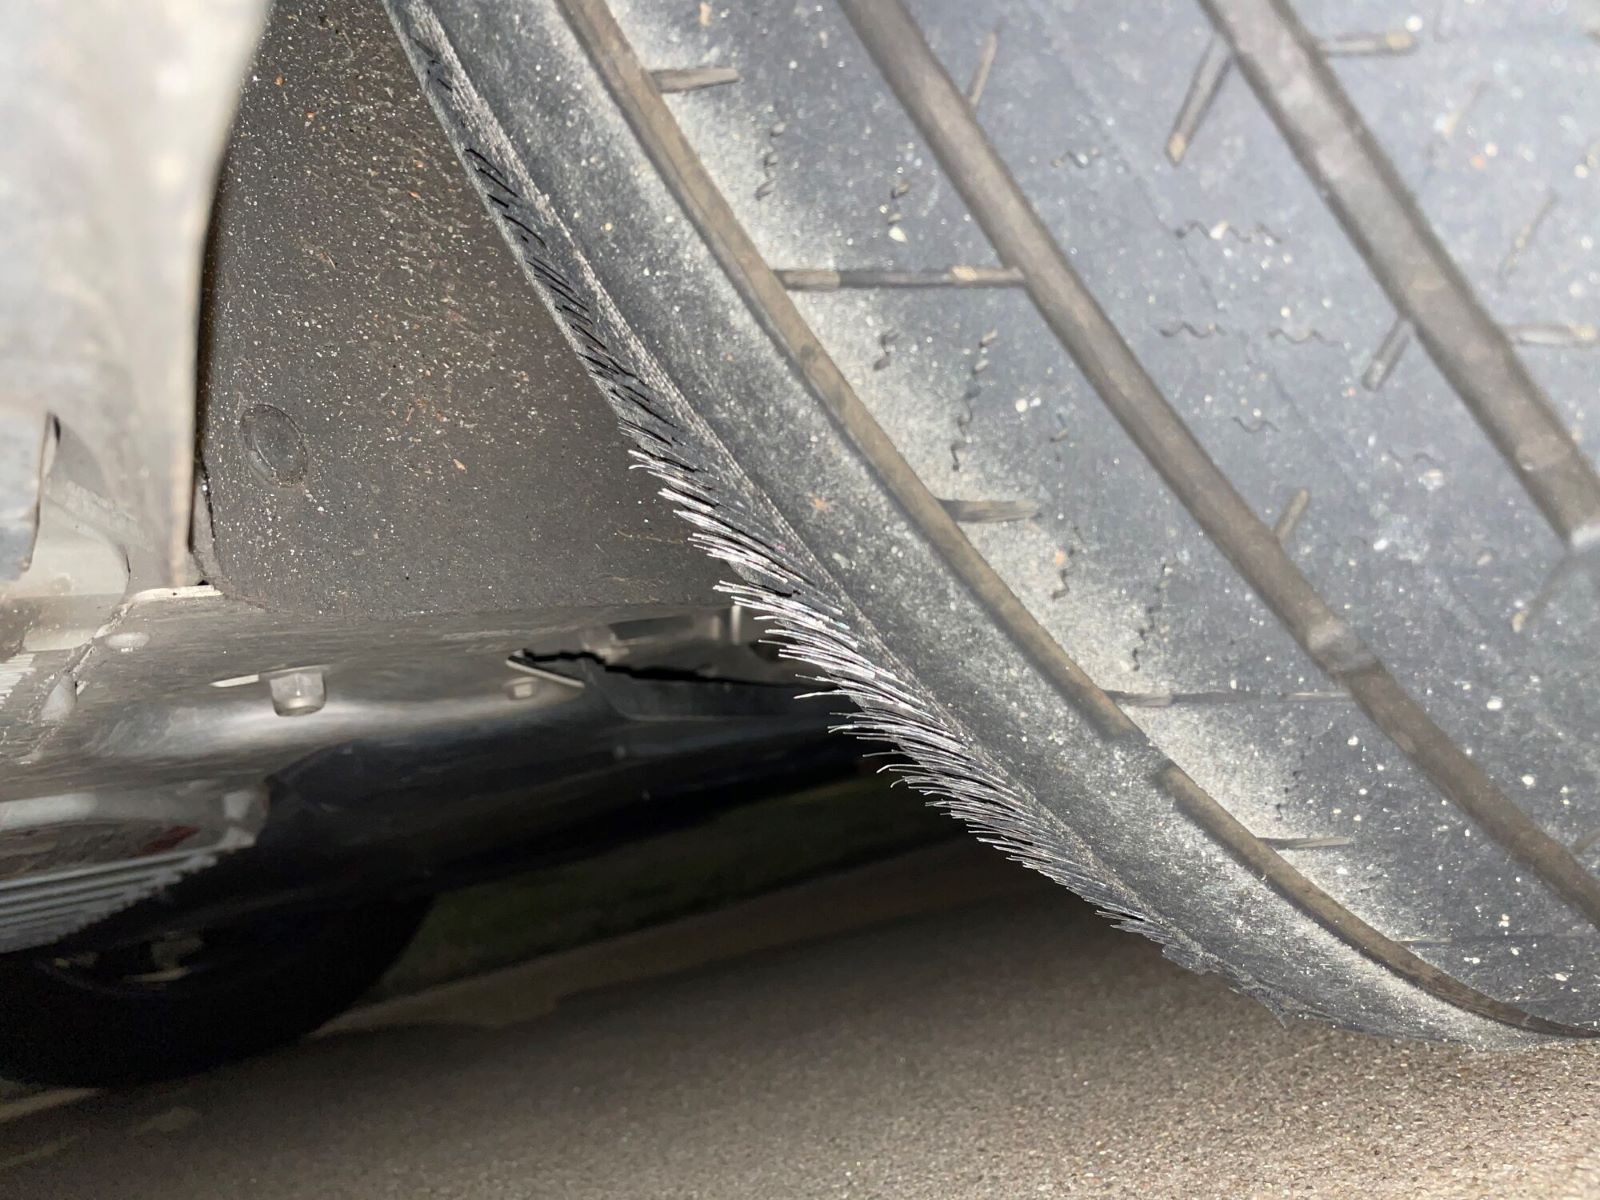 Shocking! The Surprising Truth About Driving On Tires With Wires Showing